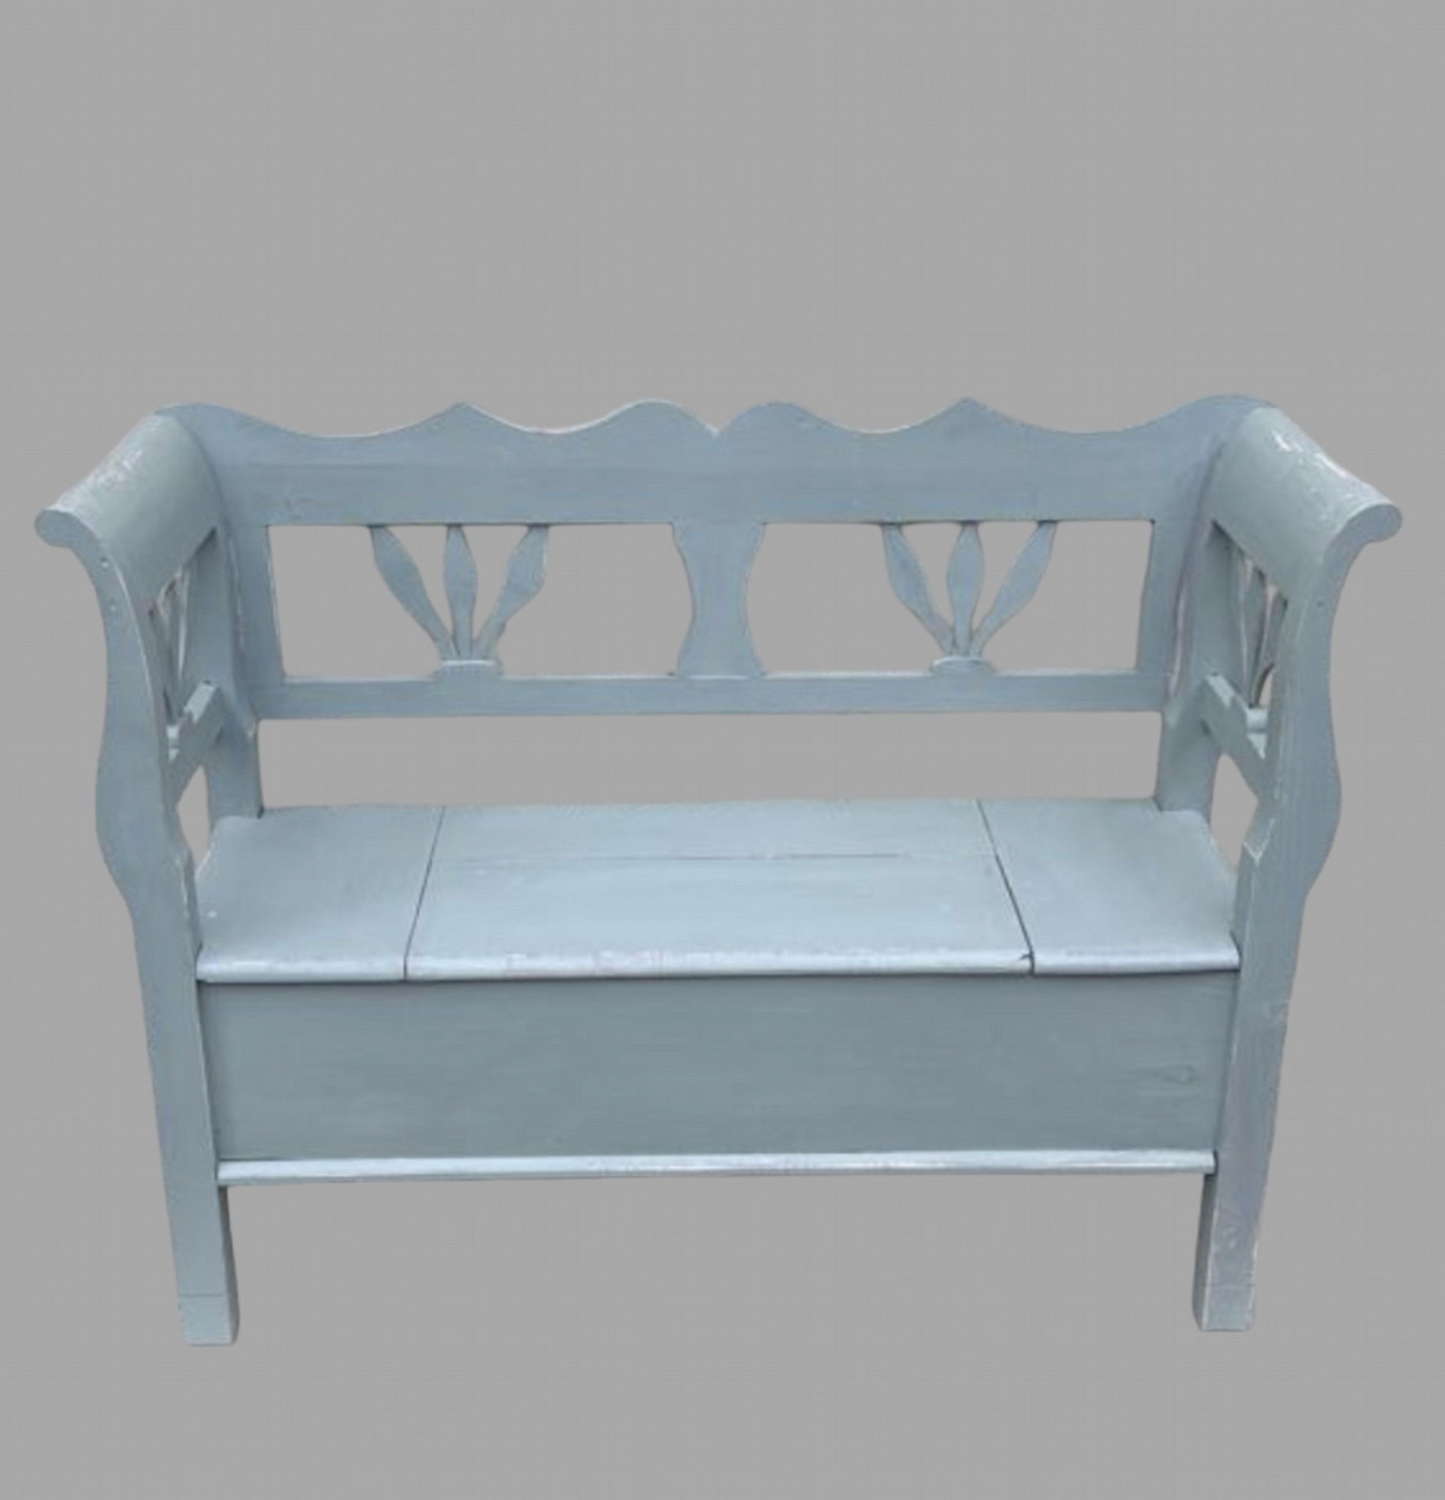 A c1960 Painted Bench